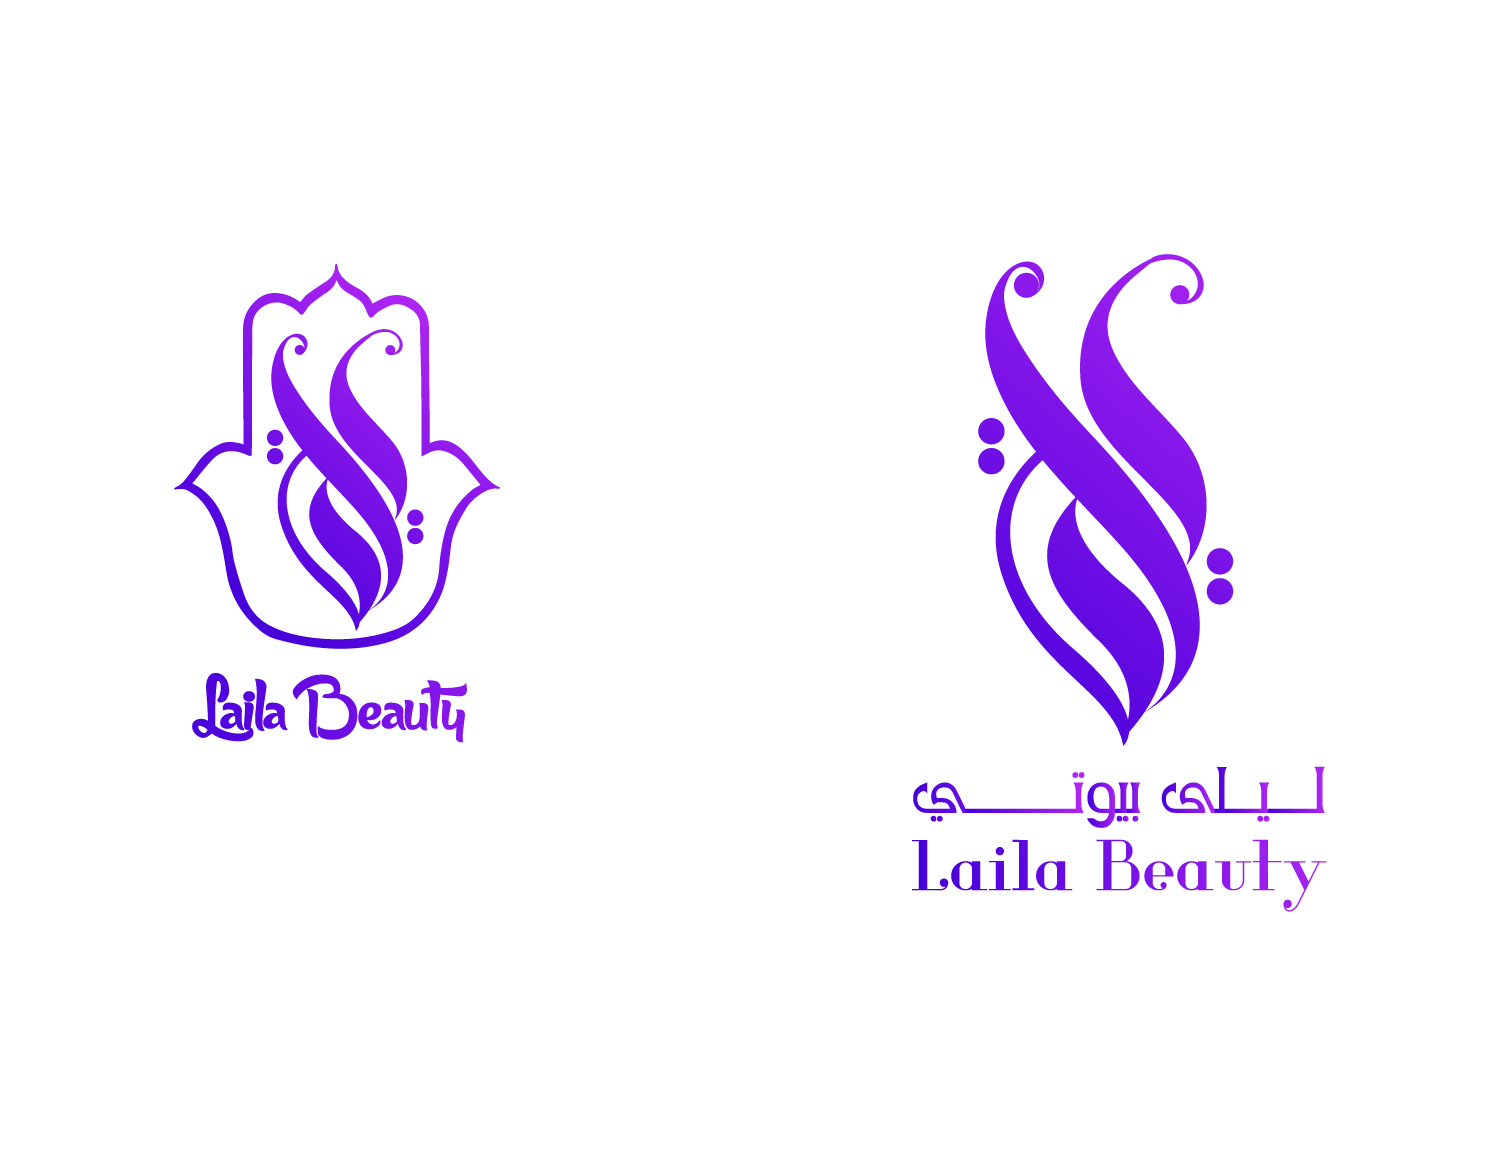 Arabic Calligraphy logo design for maakup and Beauty Products Brand